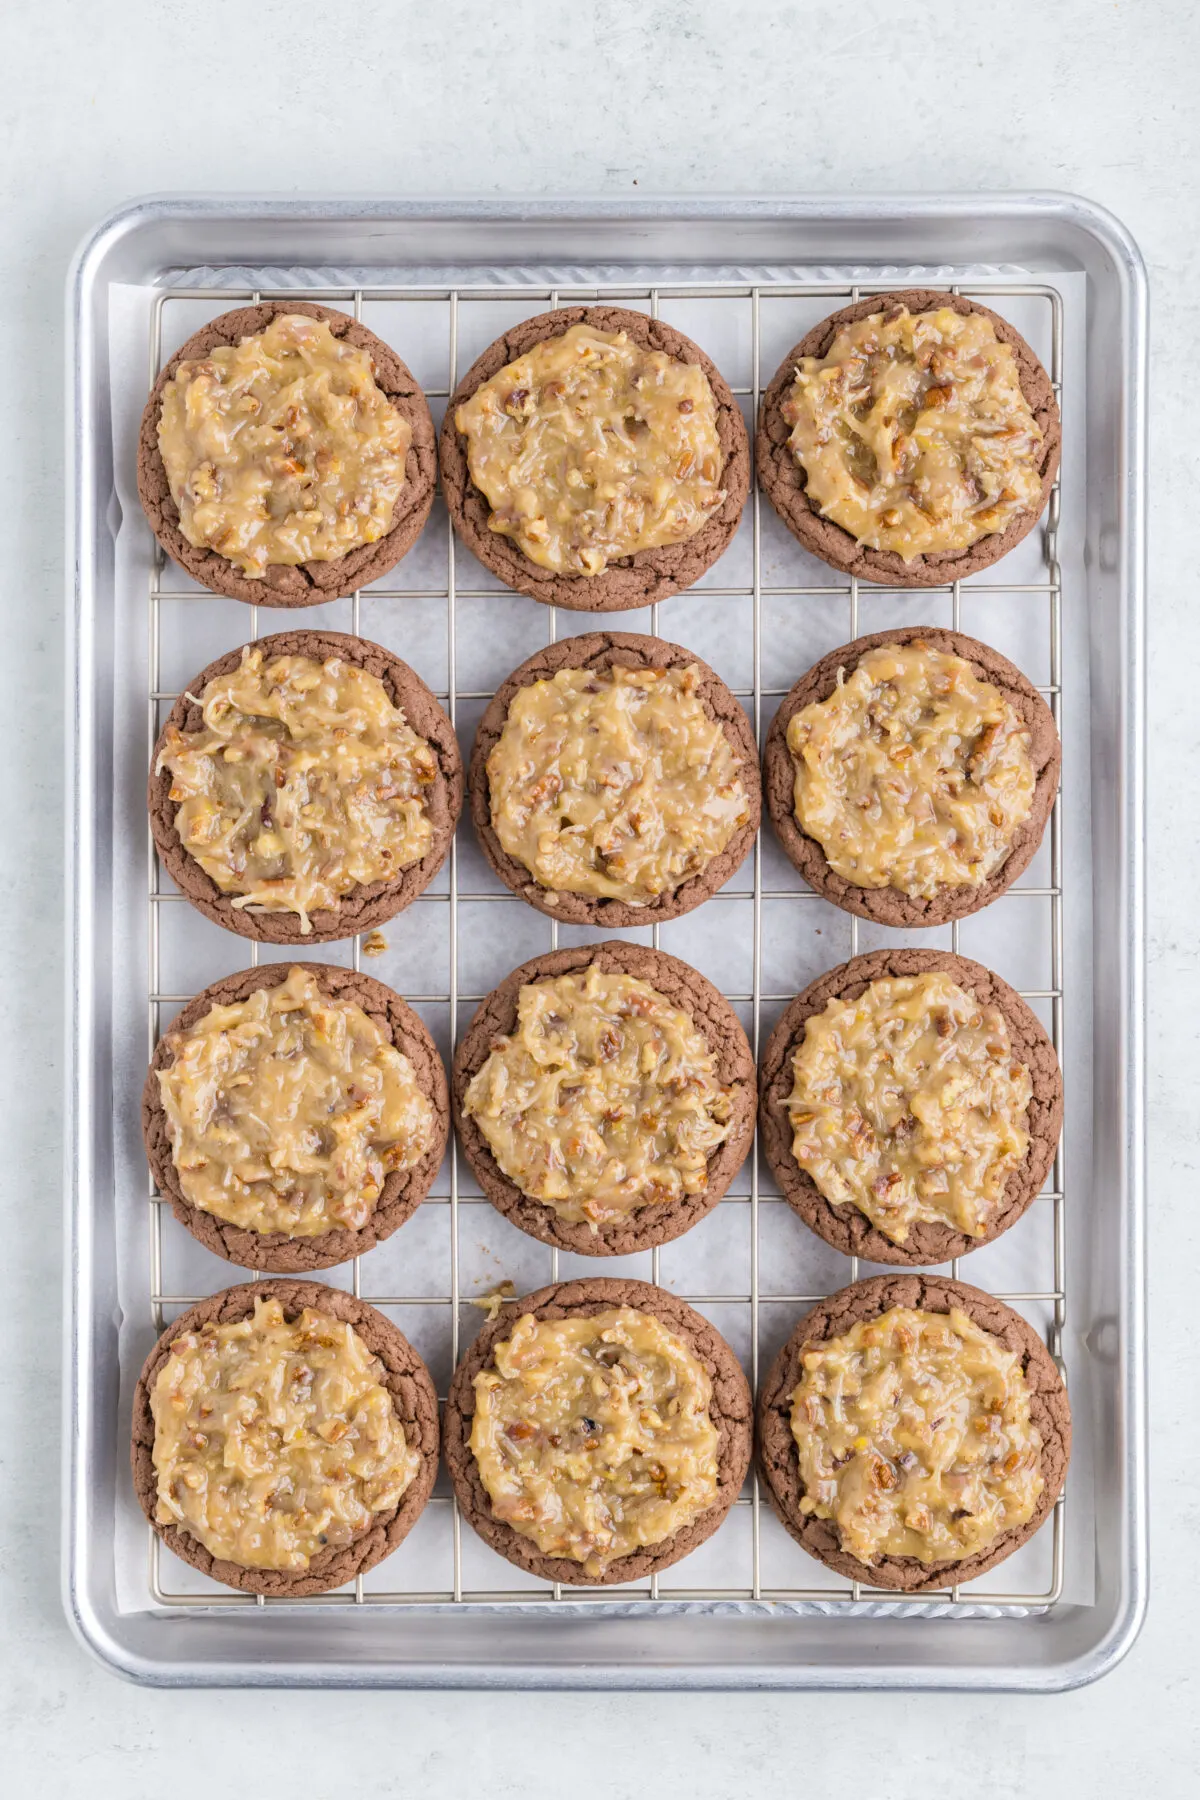 Chocolate cookies topped with coconut-pecan frosting.